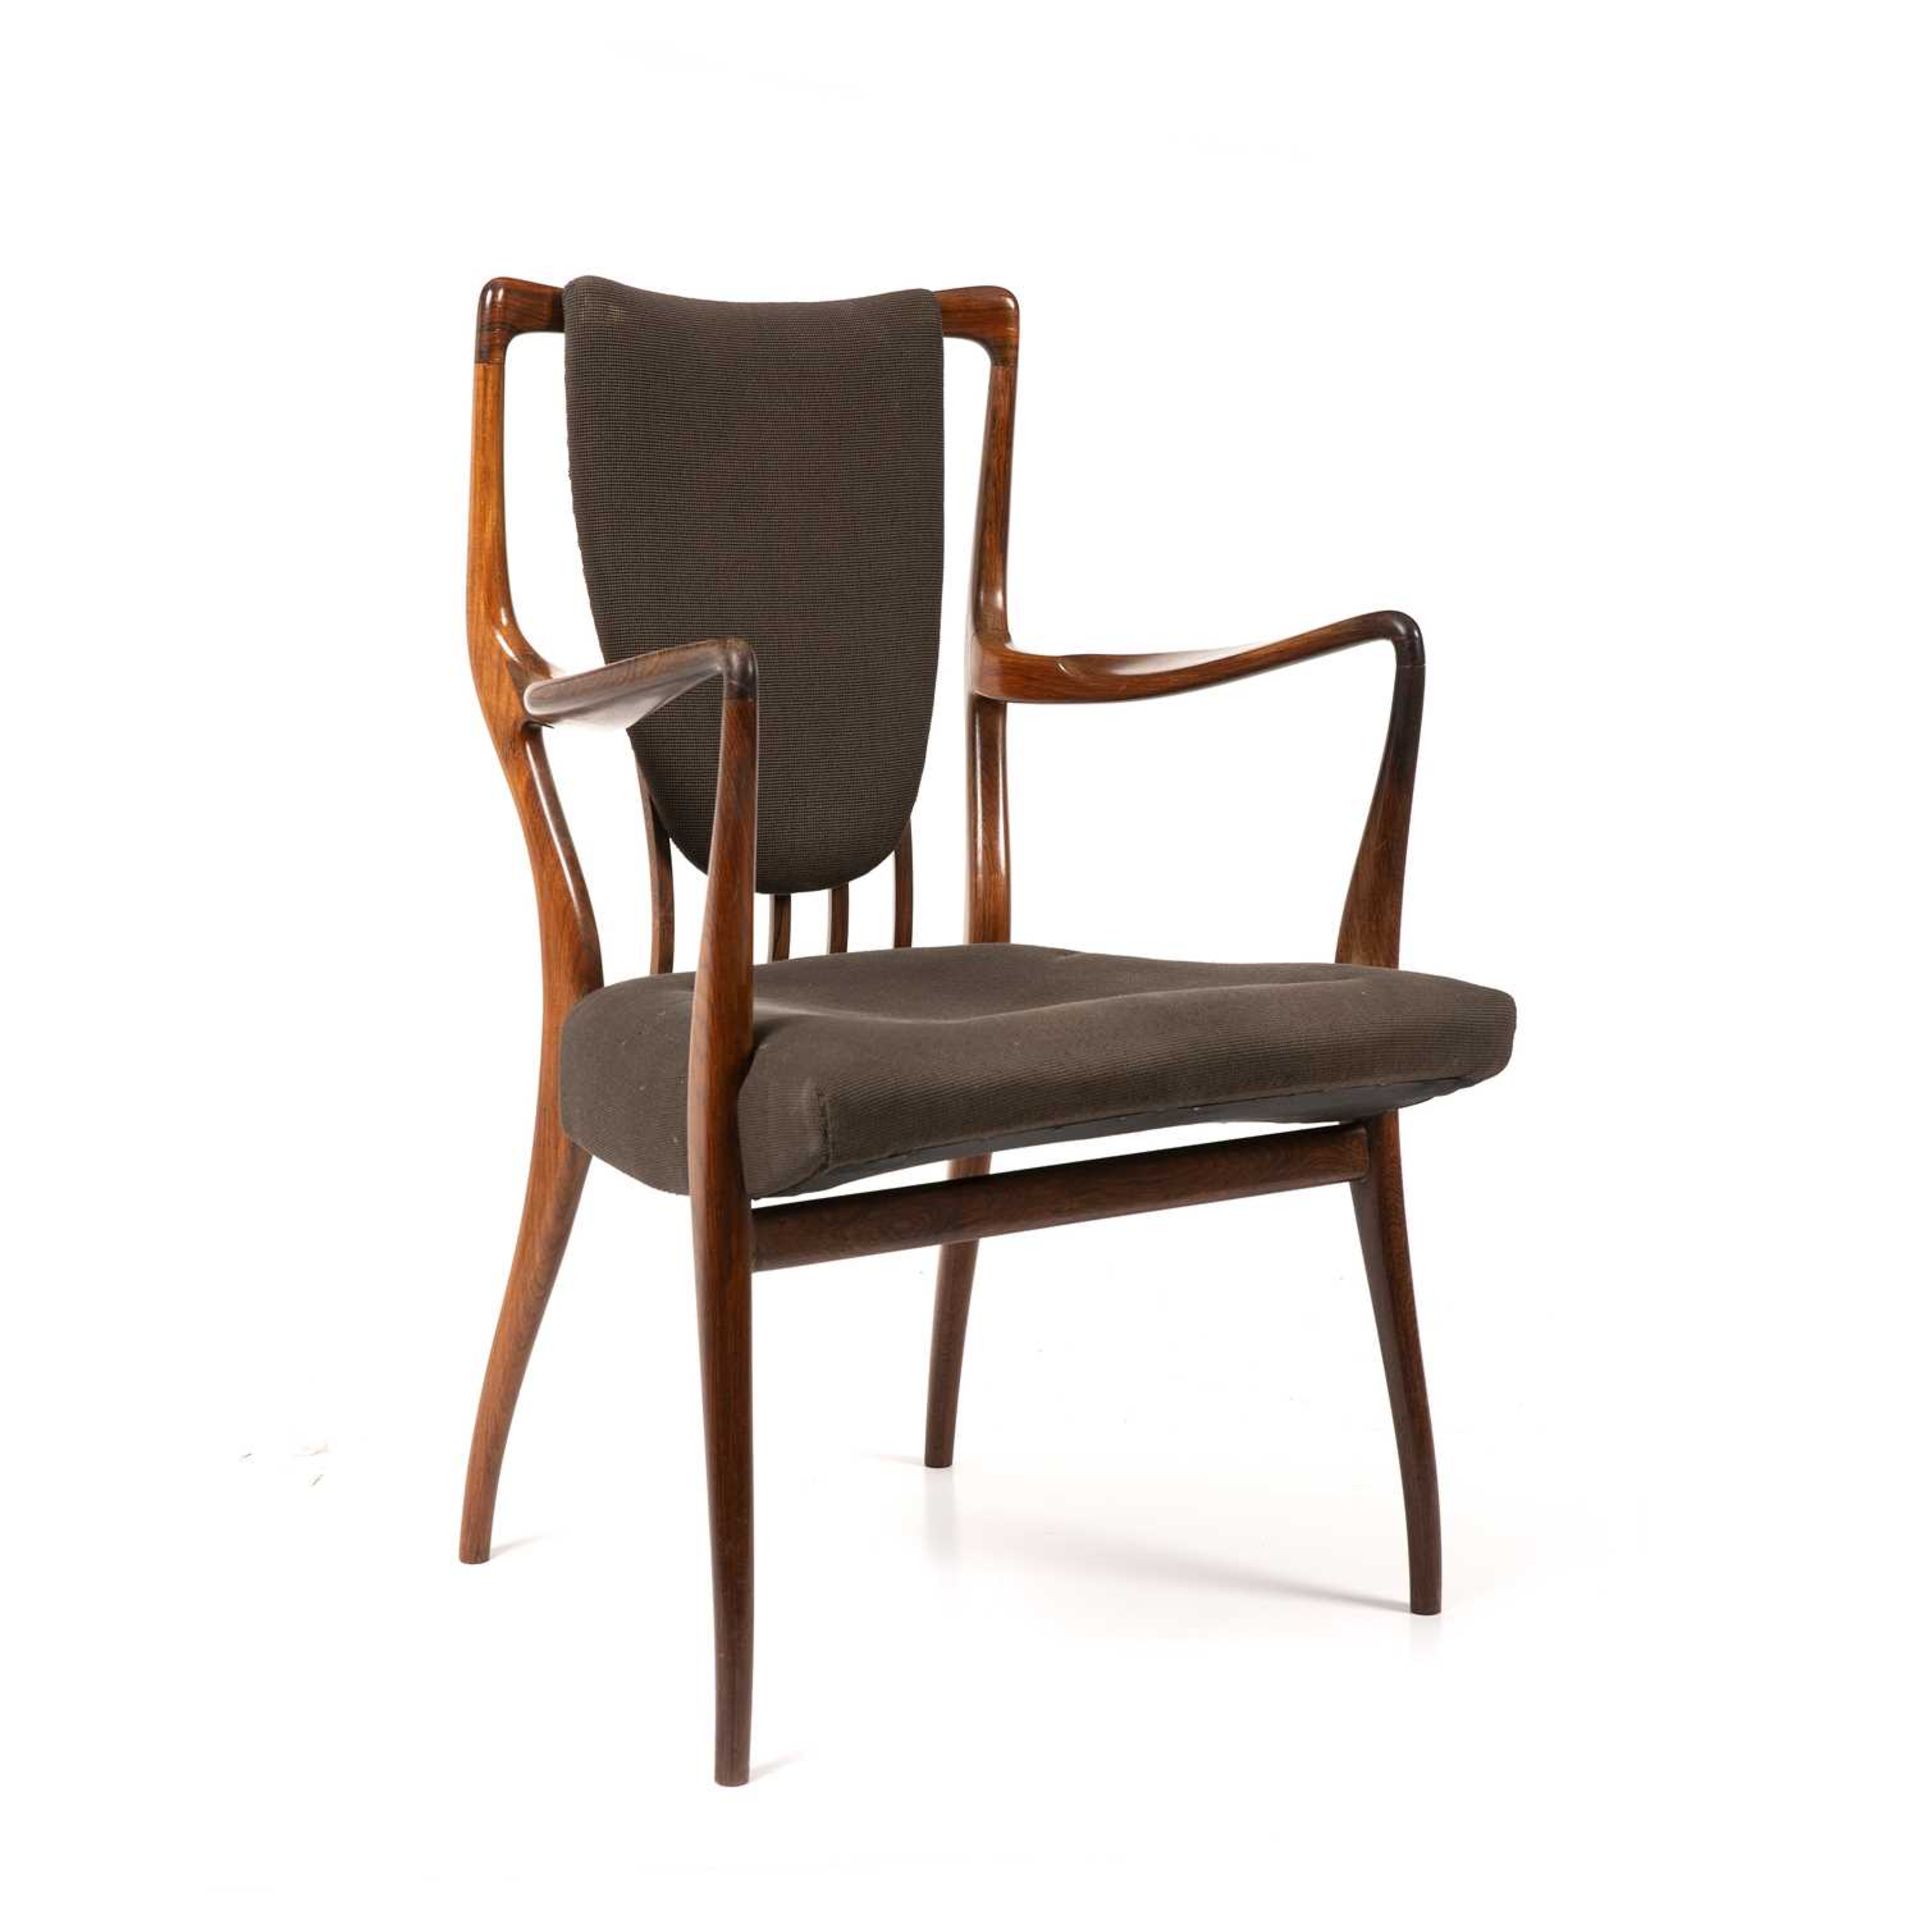 Andrew John Milne Armchair with upholstered seat 91cm high, 56cm wide, 52cm deep. - Image 3 of 5